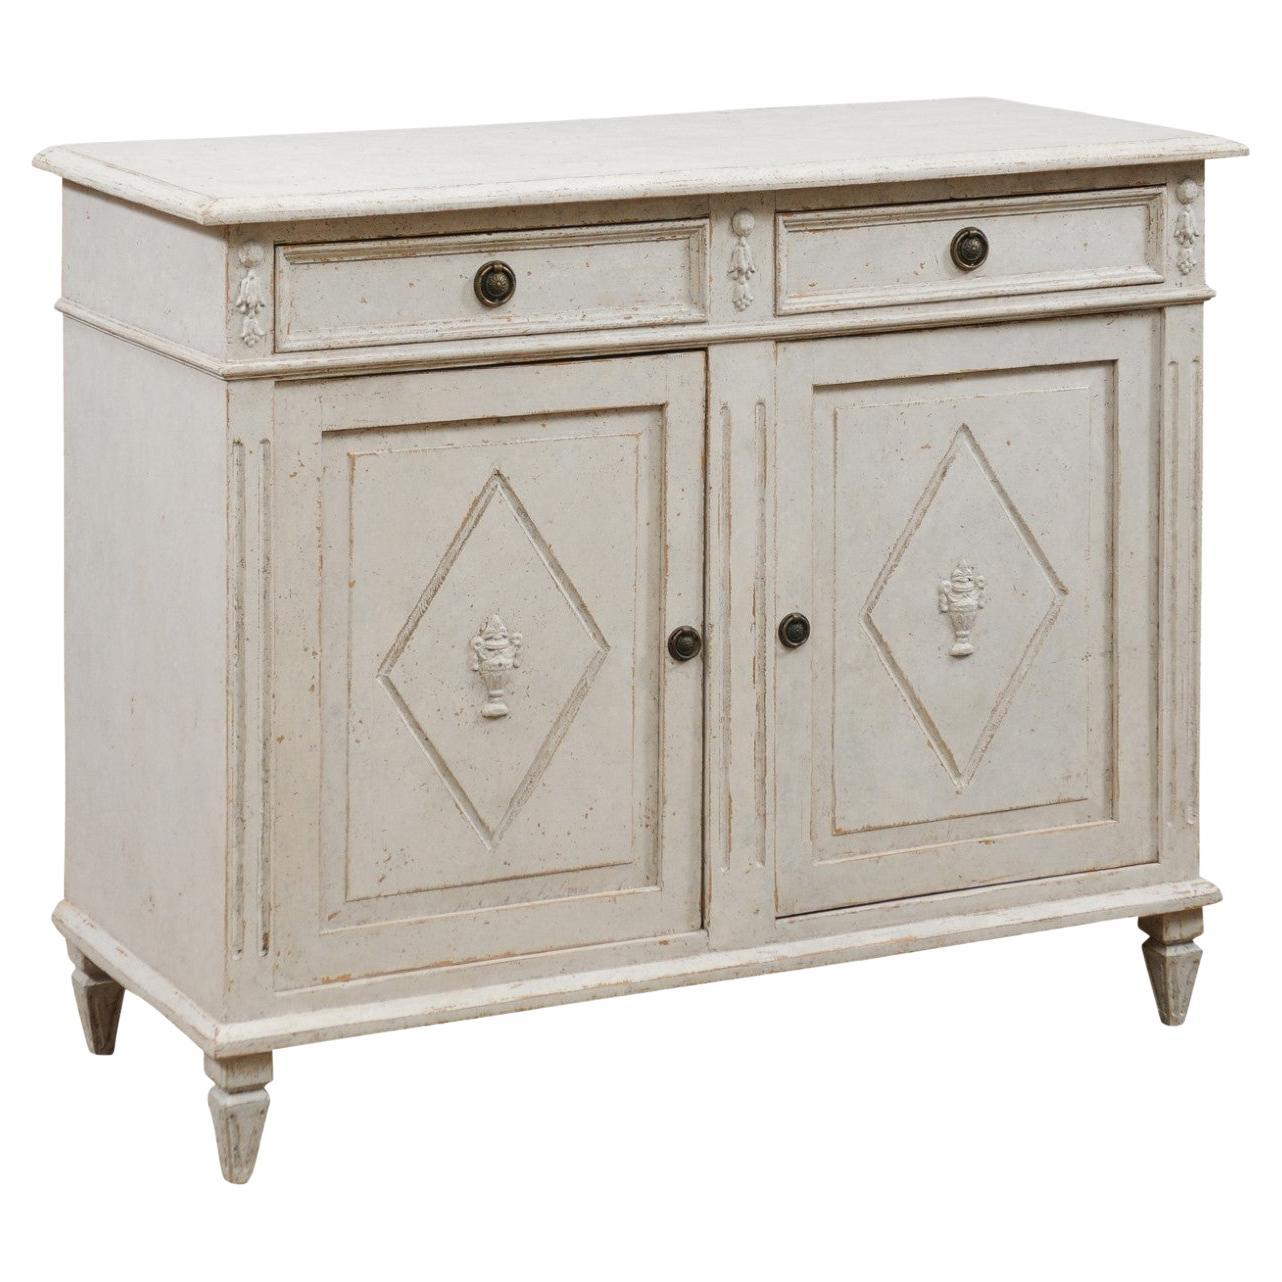 Swedish 1880s Gustavian Style Painted Sideboard with Carved Urns in Diamonds